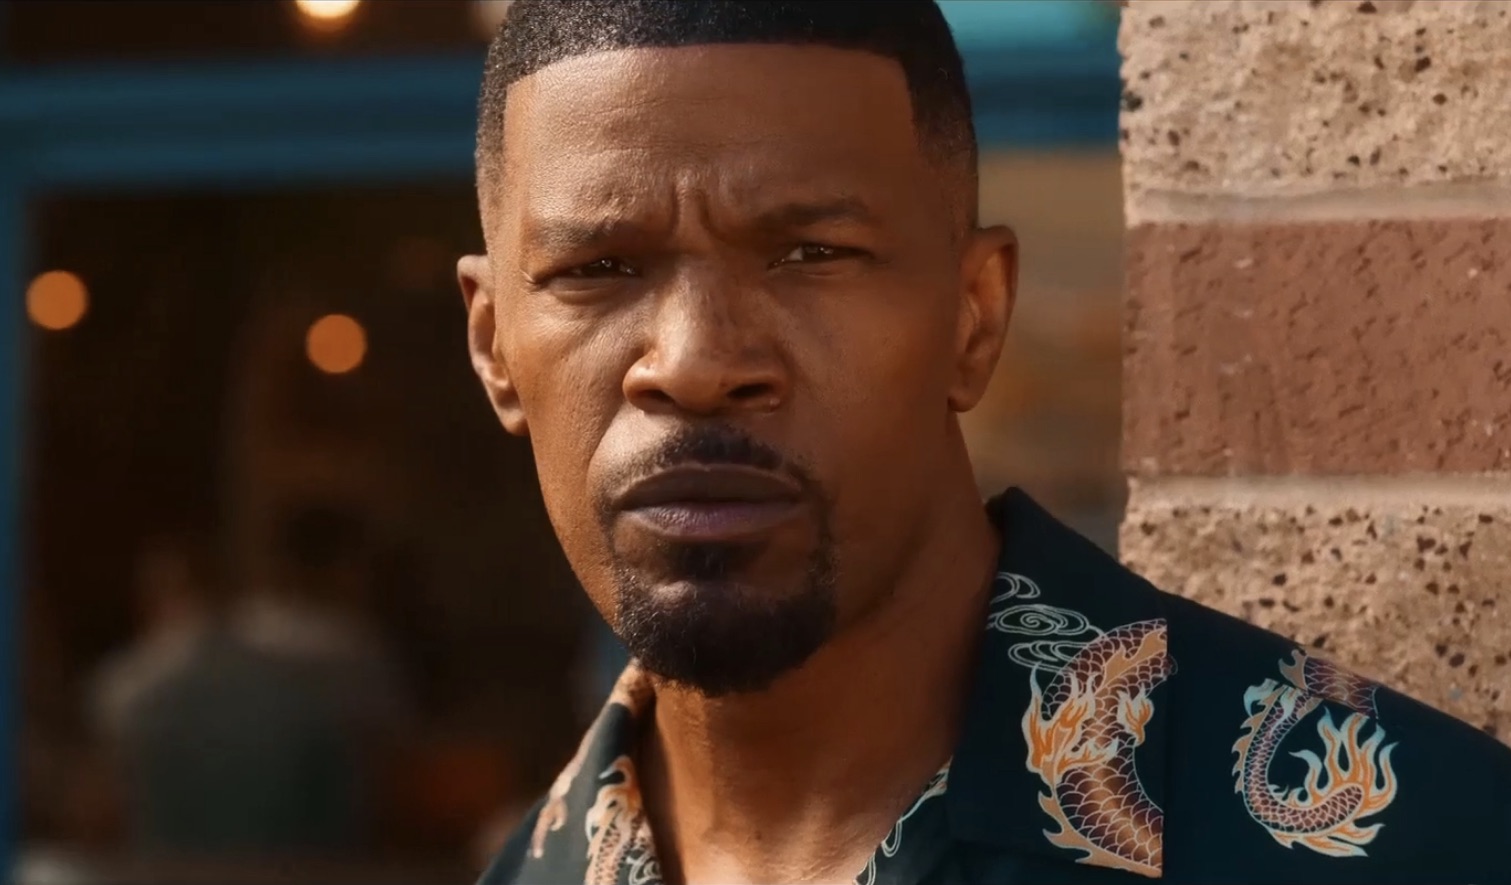 Jamie Foxx Suffers a “Medical Complication,” Family Reveal